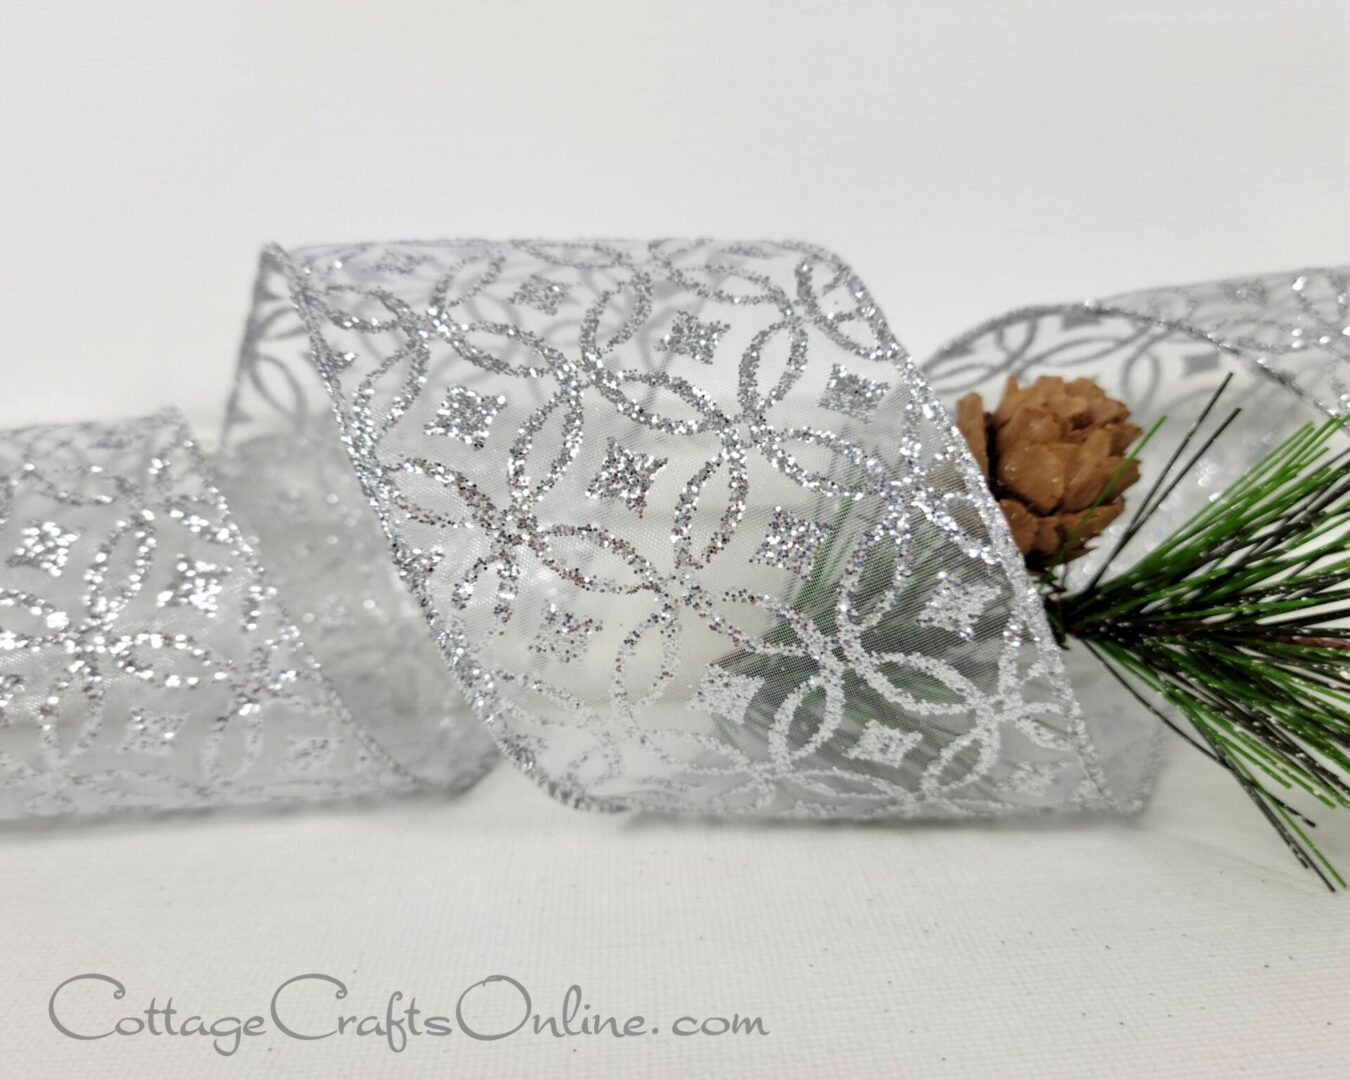 Silver glitter designs on white sheer 2.5" wide wired ribbon from the Etsy shop of Cottage Crafts Online.